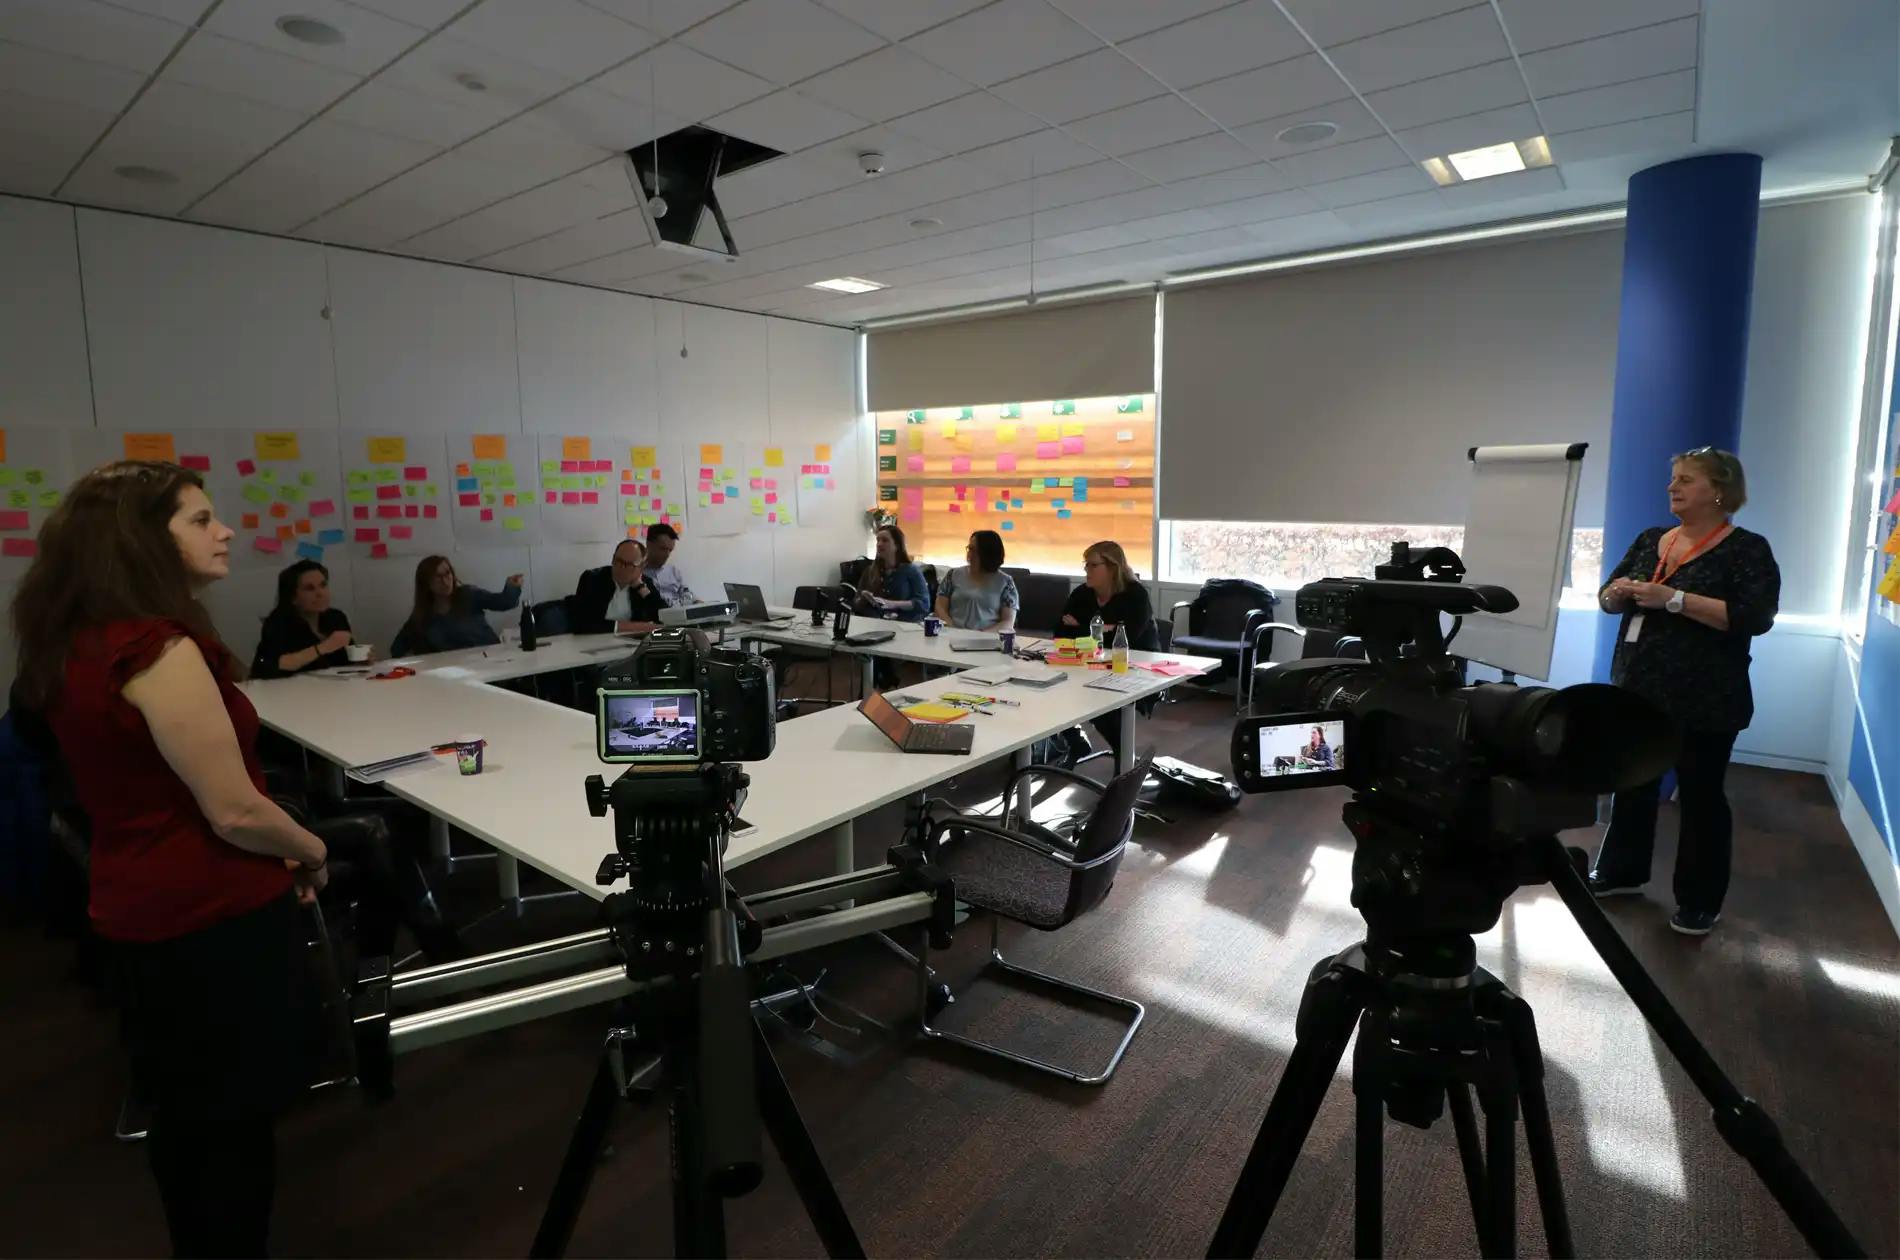 Wide shot of conference with cameras in foreground